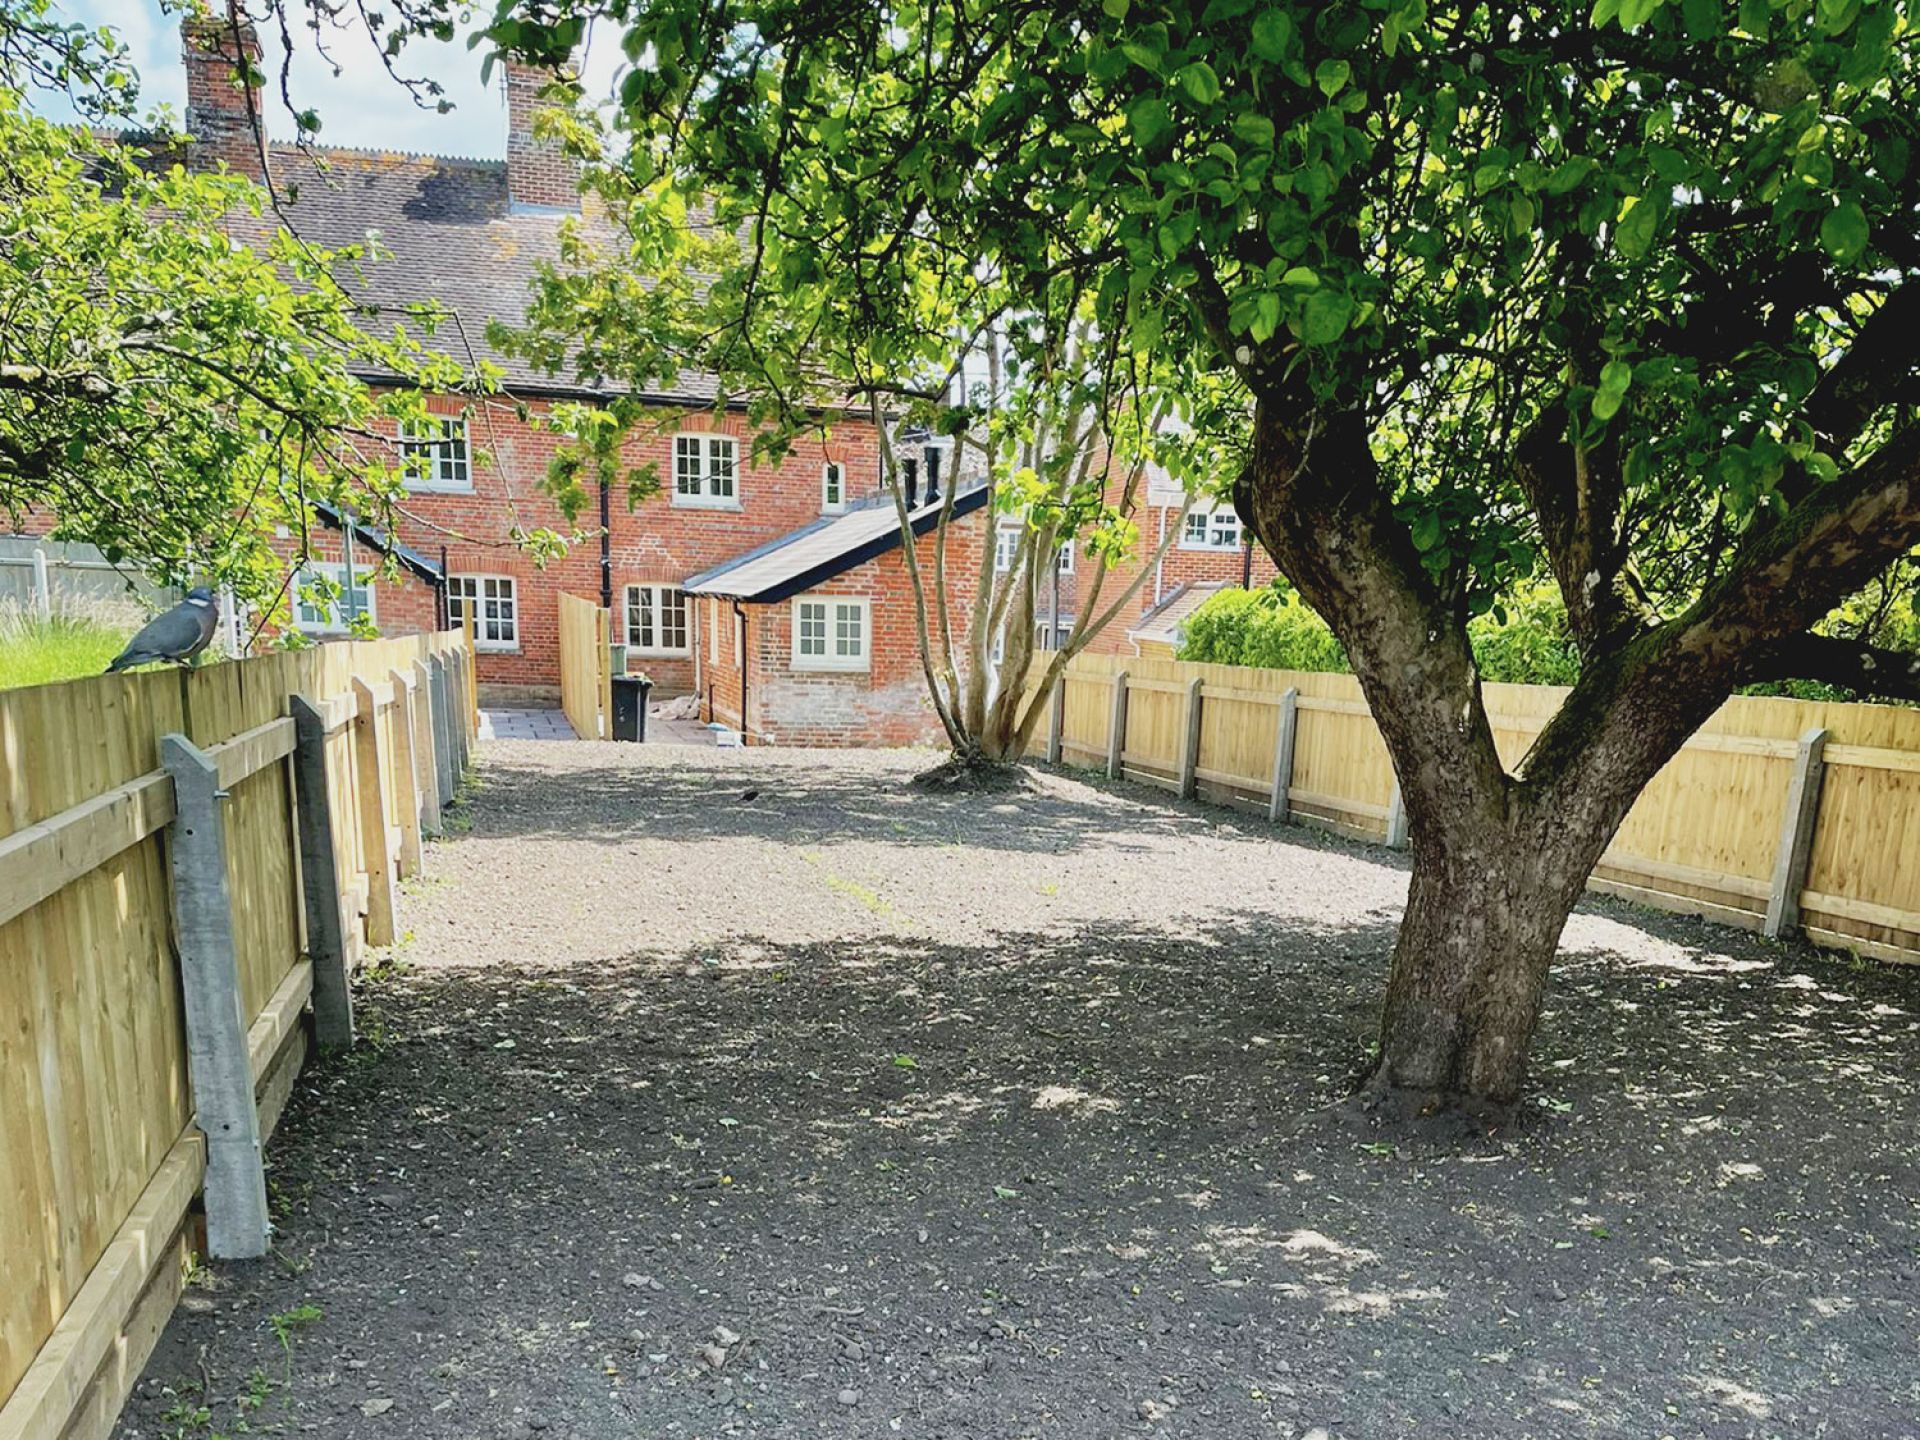 Completed outside drive way of crandborne house with gravel floor and large tree.